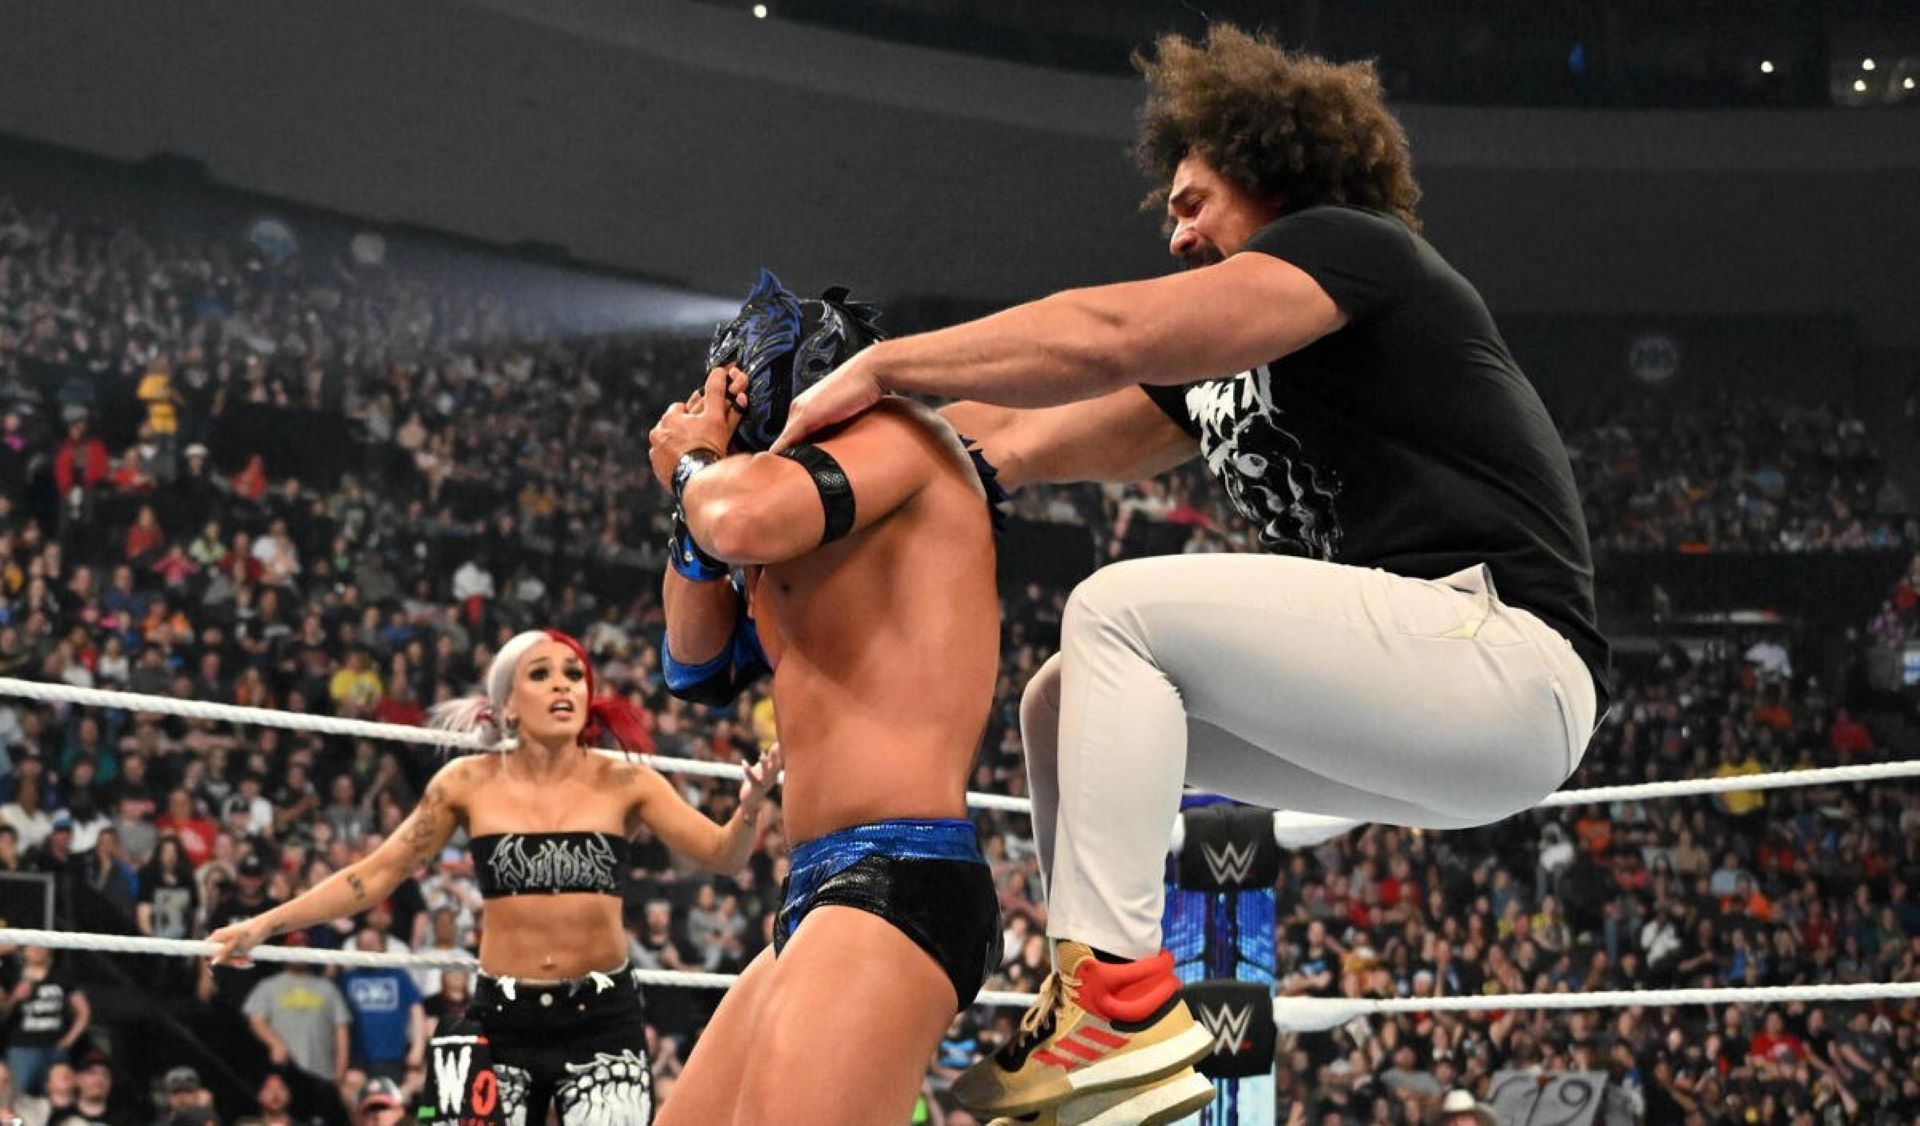 Carlito resented Rey Mysterio for picking Dragon Lee - and then Andrade - over him.